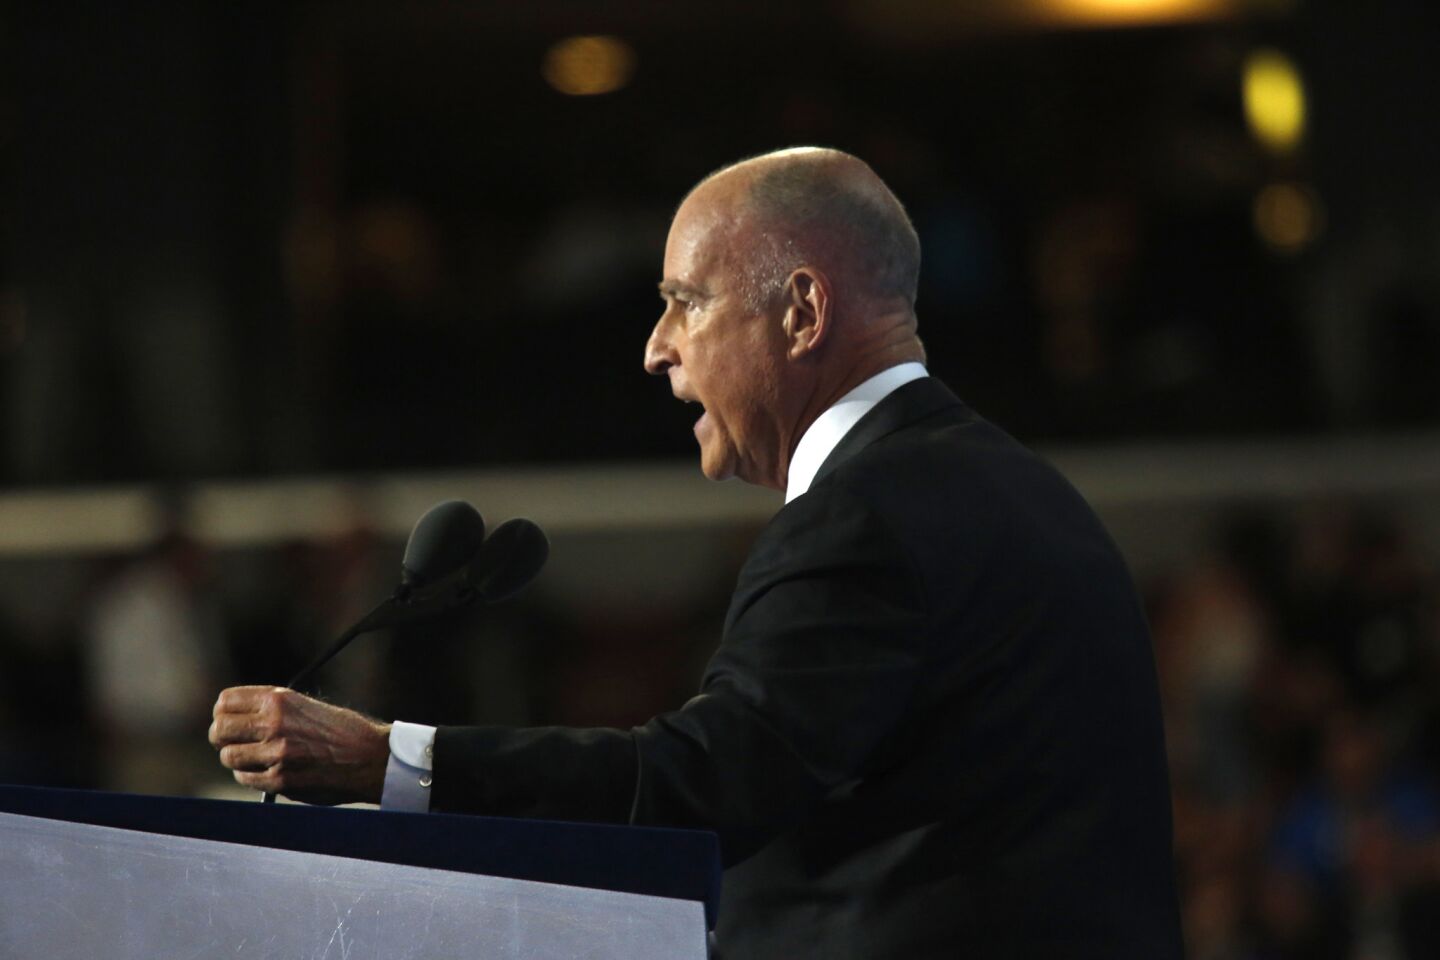 California governor Jerry Brown speaks on the third day of the Democratic National Convention.